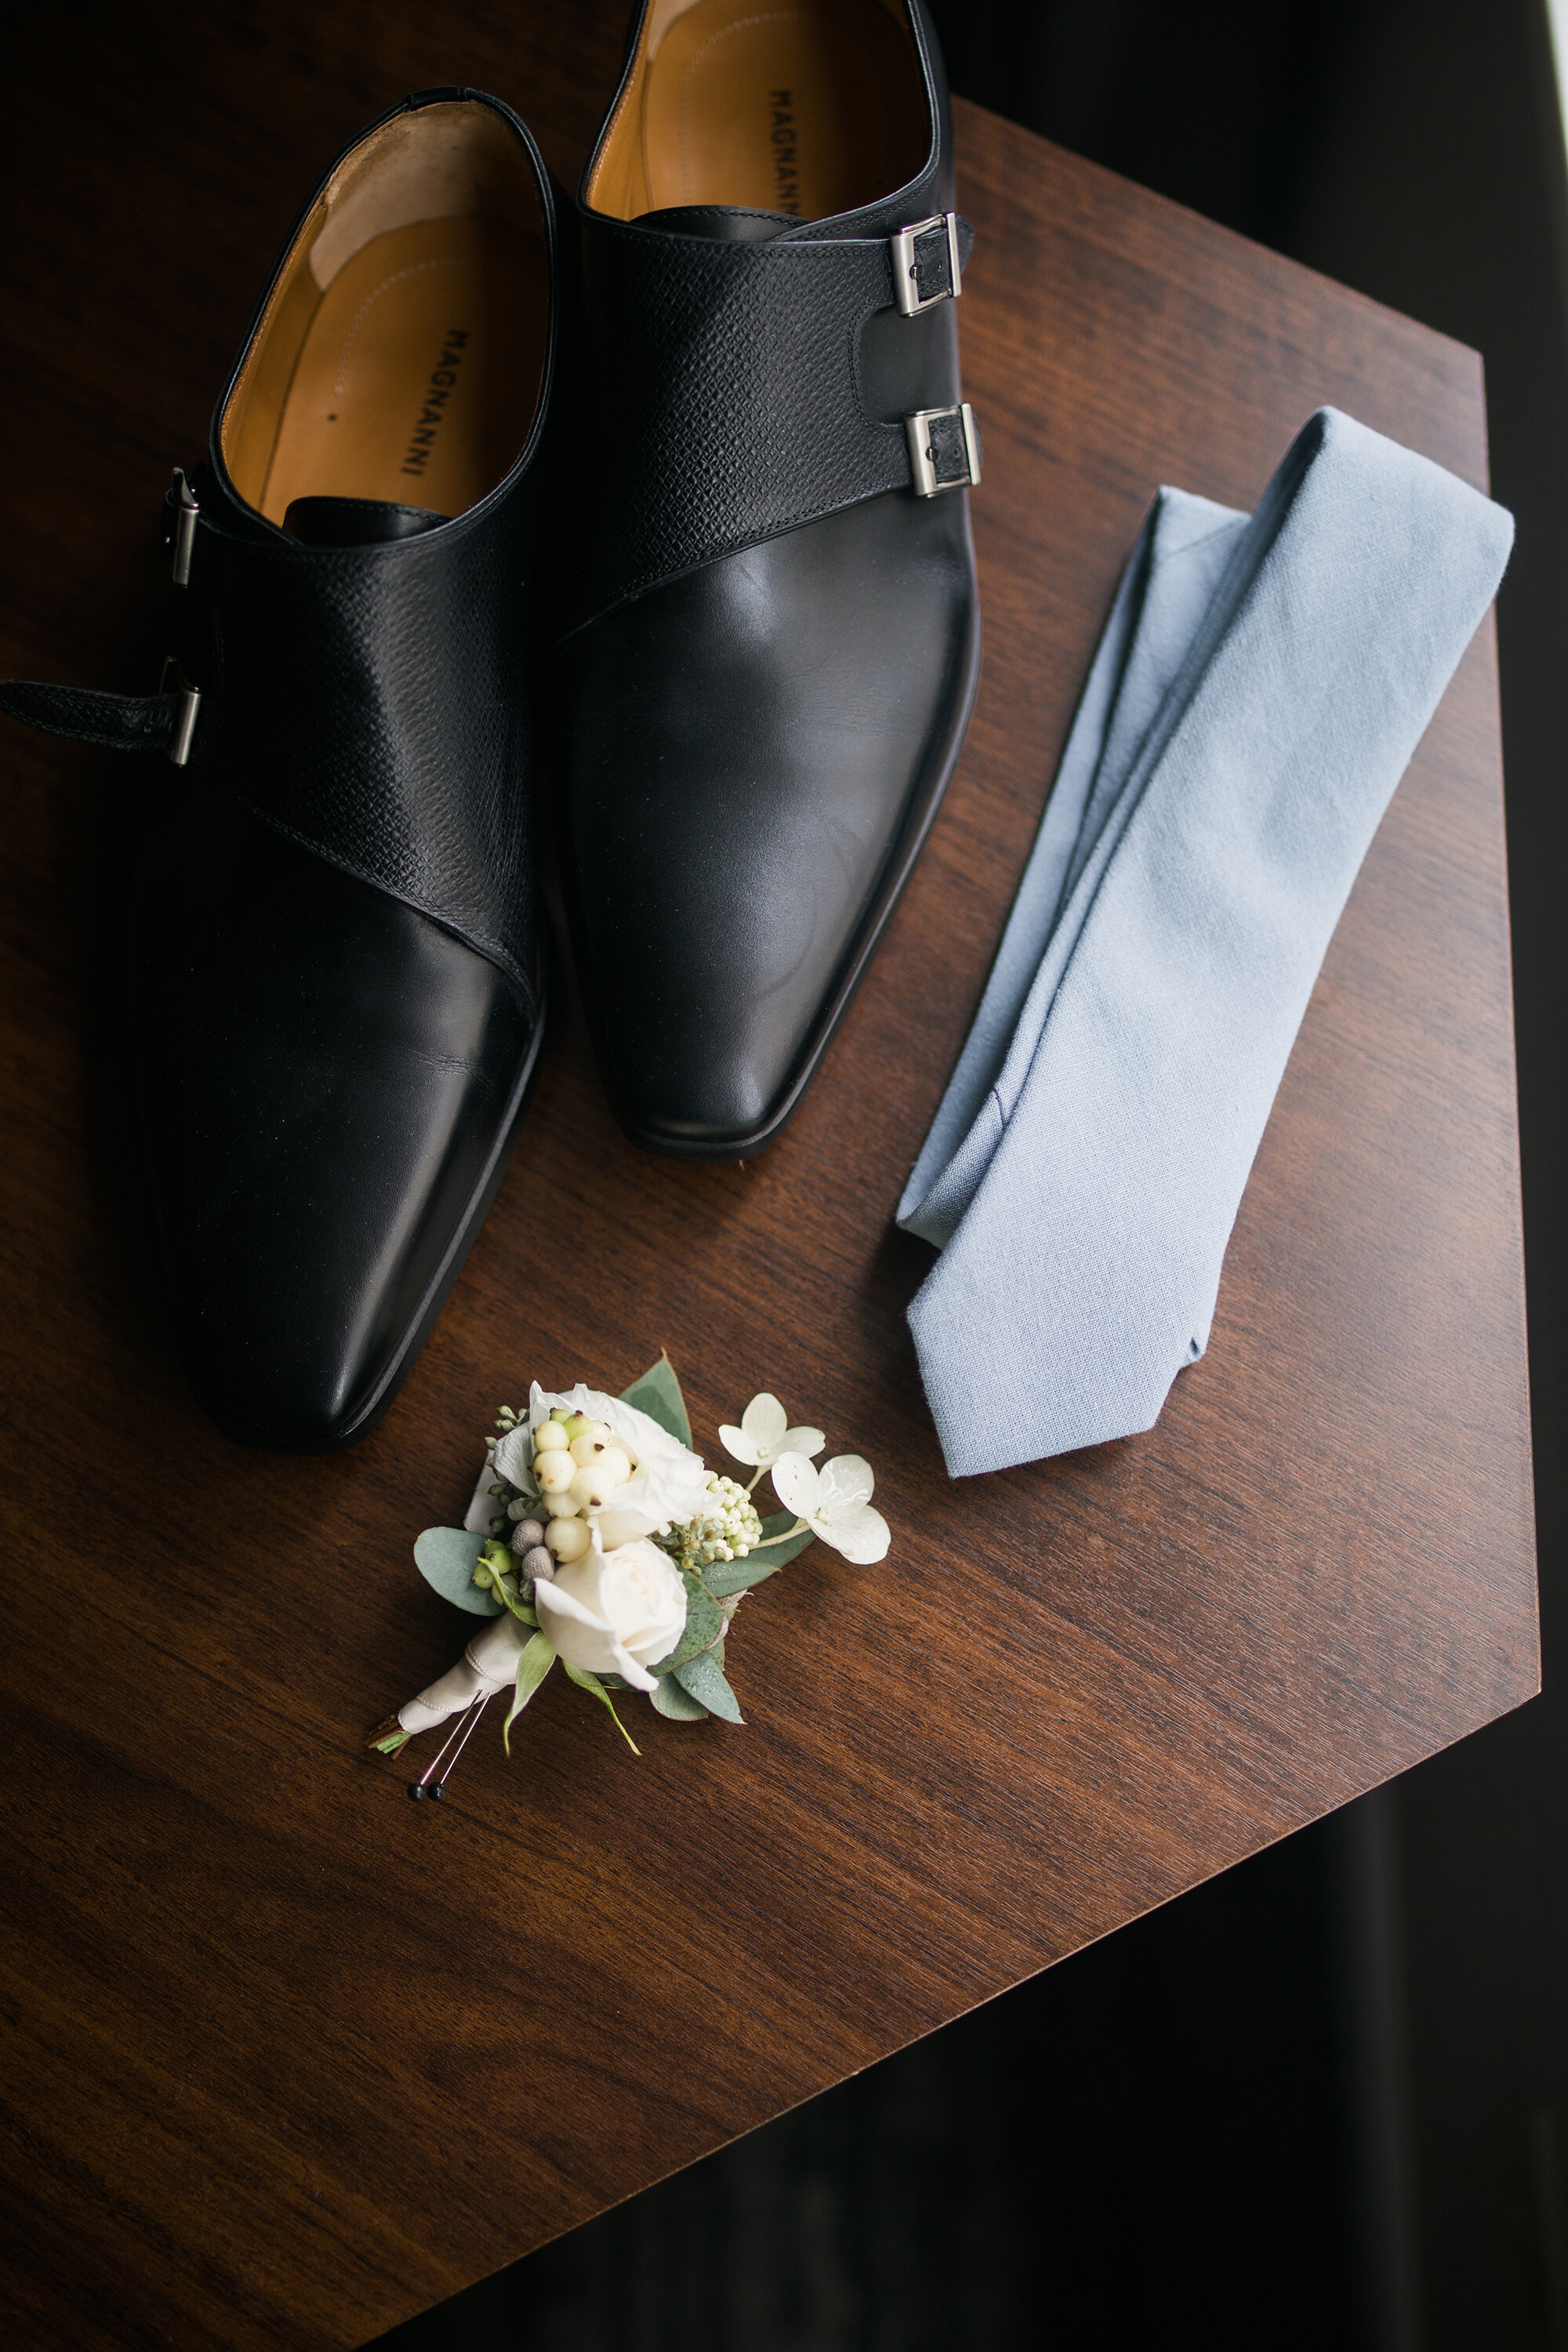 Chicago History Museum Summer Wedding captured by Layla Eloa featured on CHI thee WED